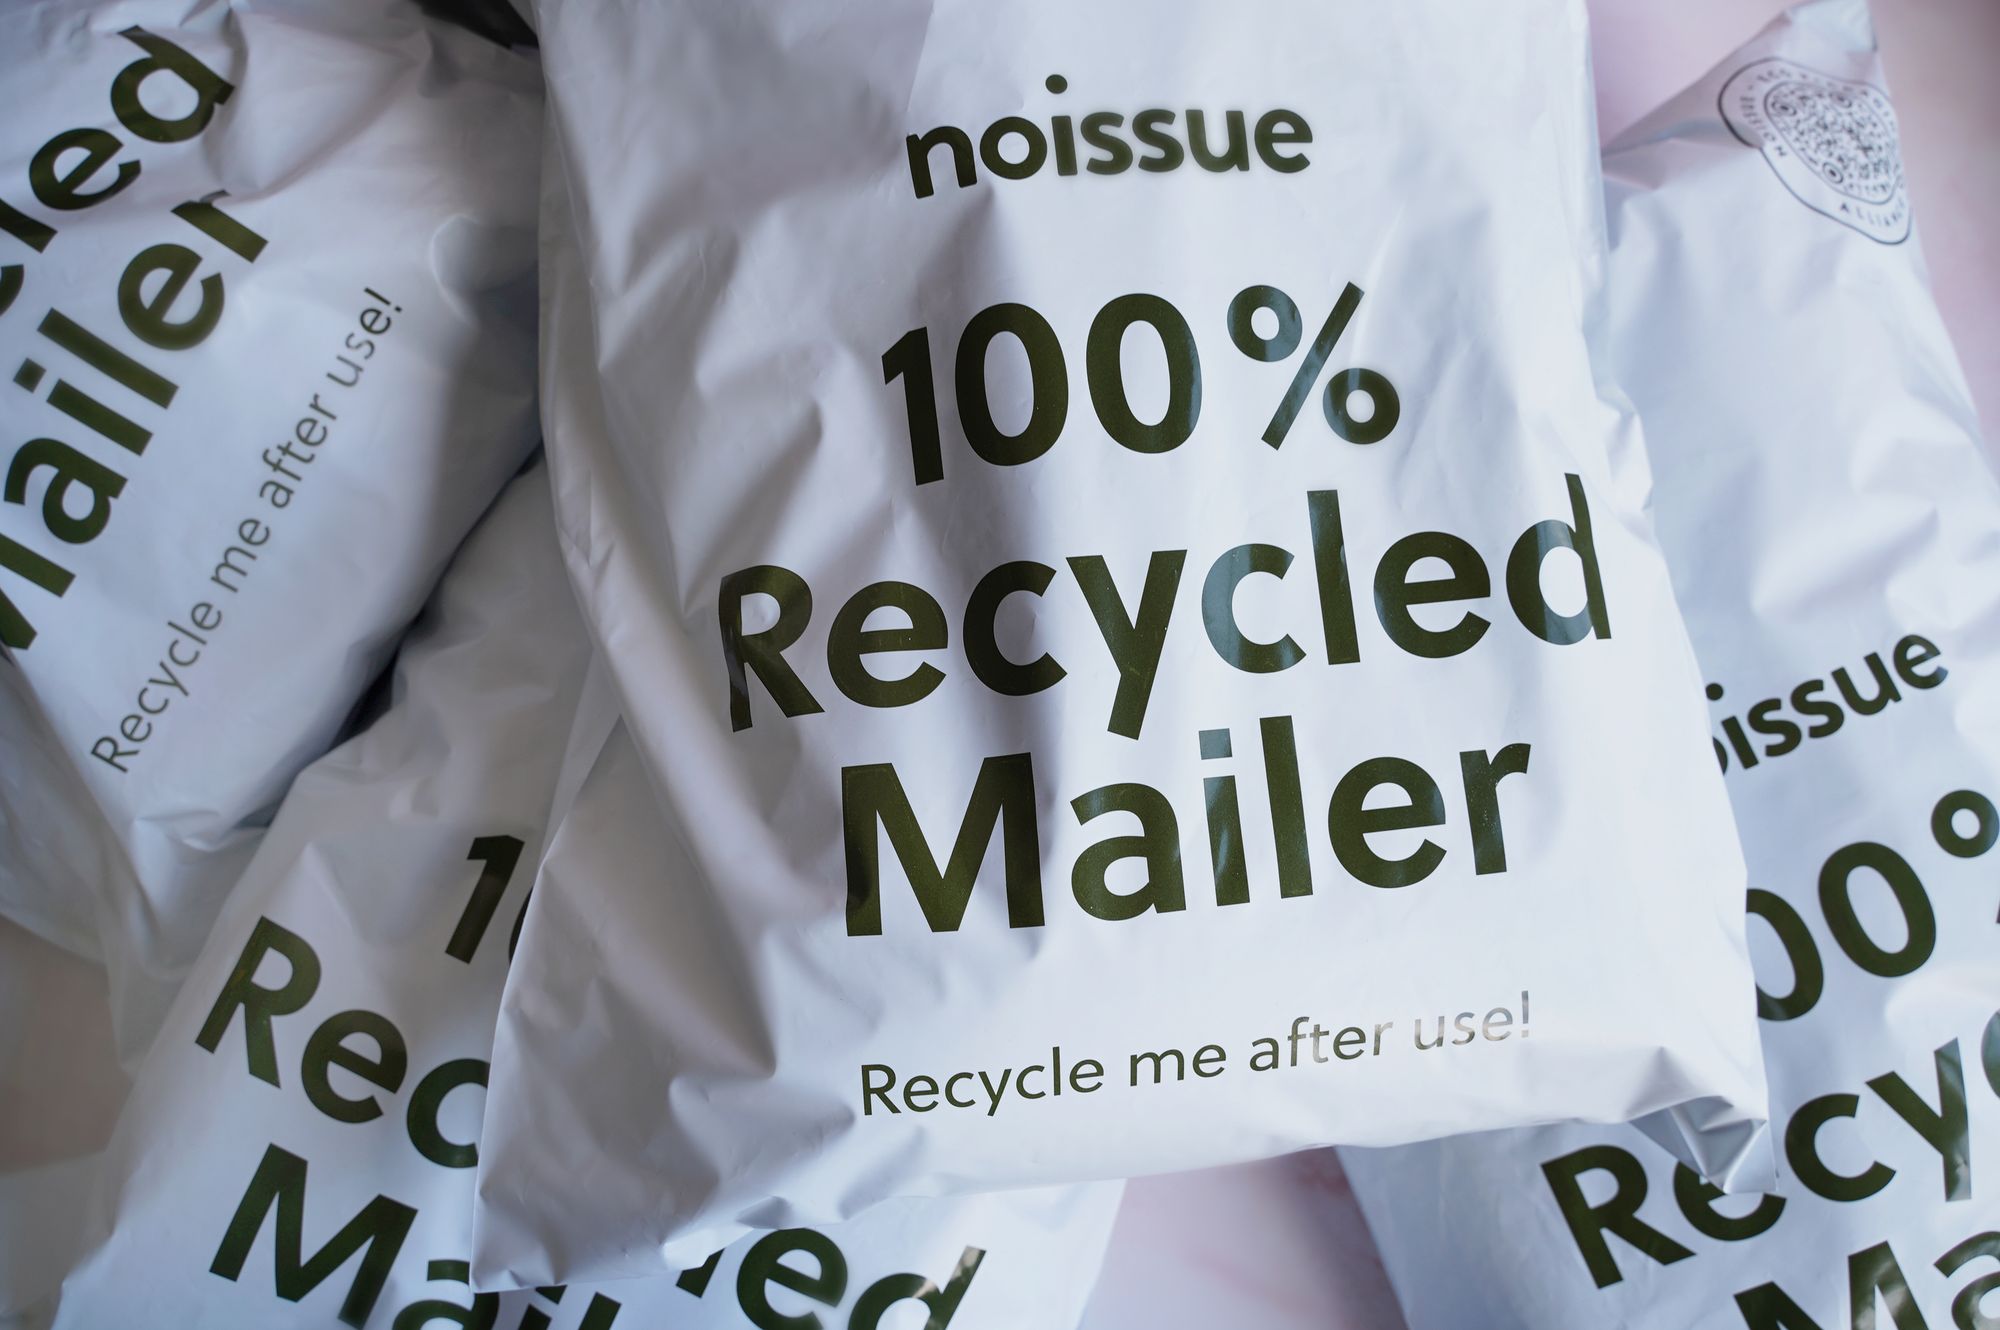 7 Benefits of the Materials Used to Create Recycled Grocery Bags